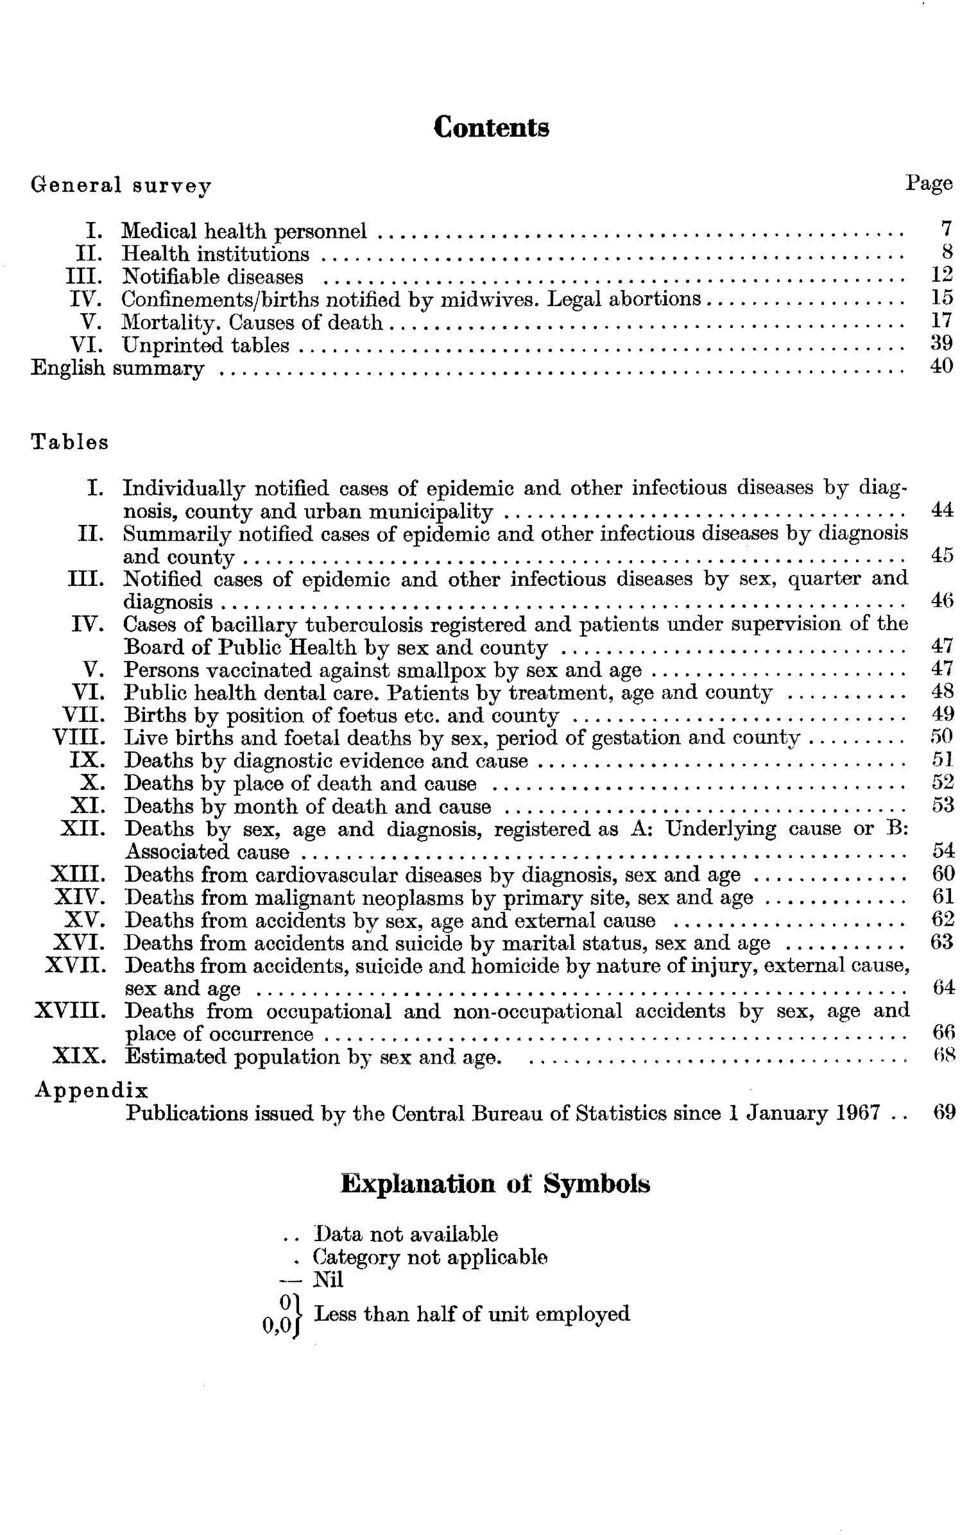 Summarily notified cases of epidemic and other infectious diseases by diagnosis and county 45 III. Notified cases of epidemic and other infectious diseases by sex, quarter and diagnosis 46 IV.